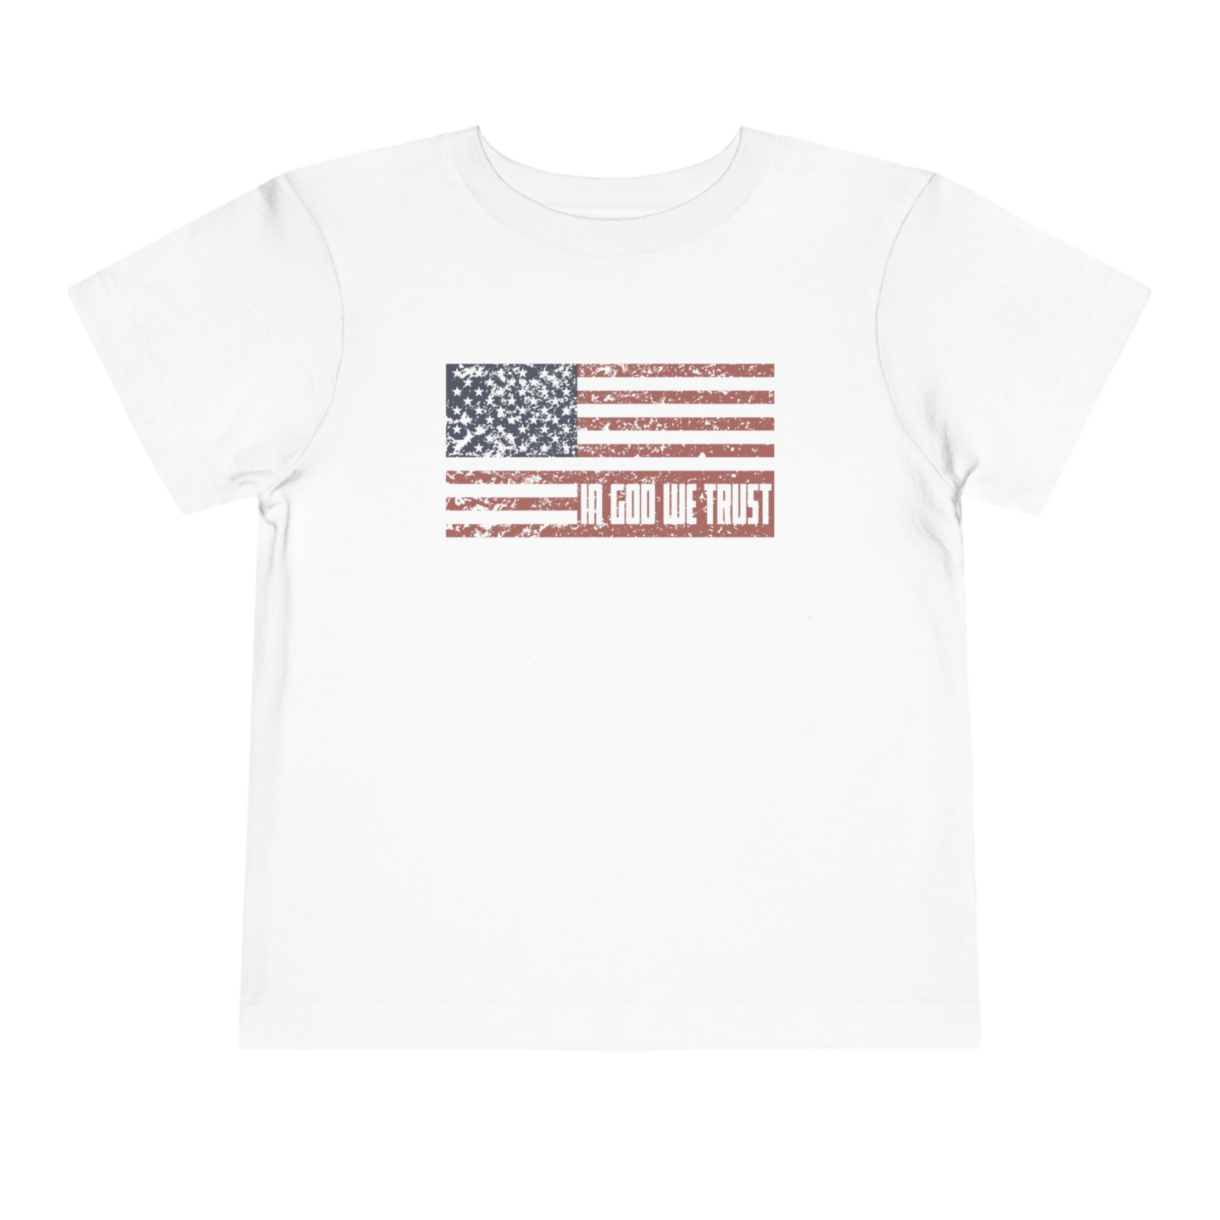 white flag toddler tee with in god we trust in flag